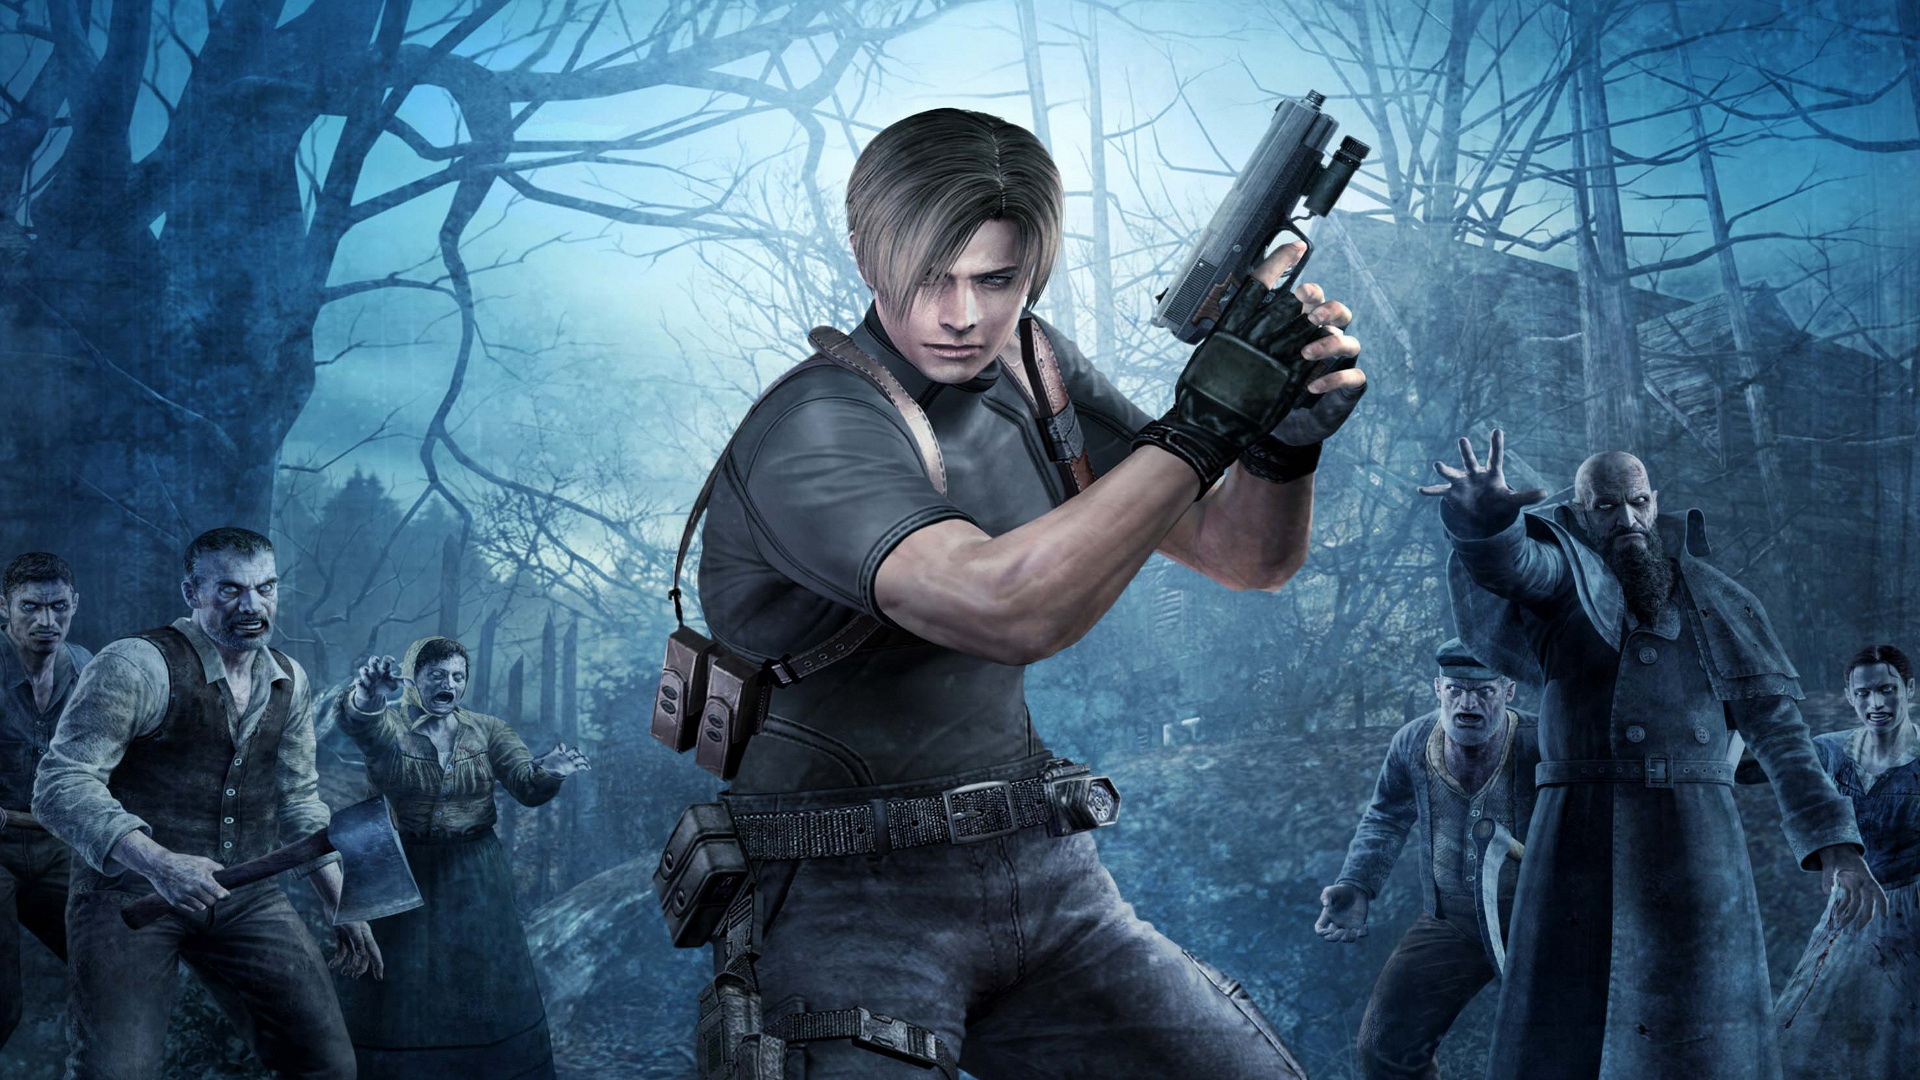 Resident Evil HD 1080p Wallpaper Game Walls Find